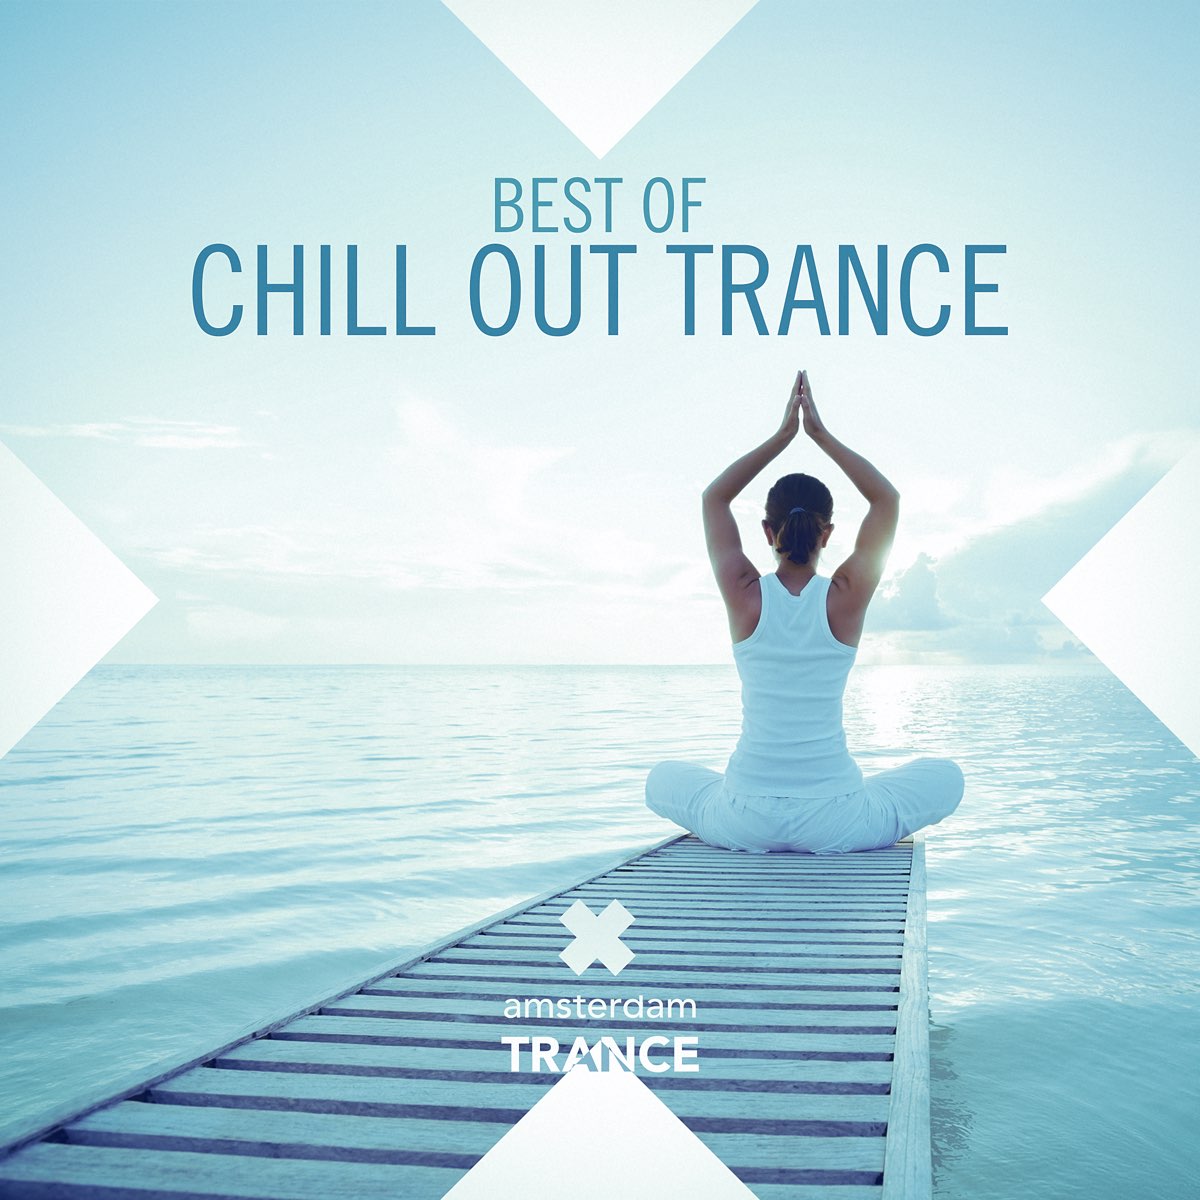 Chillout Trance. Vocal Trance Chillout. Chill надпись. Chillout картинки.